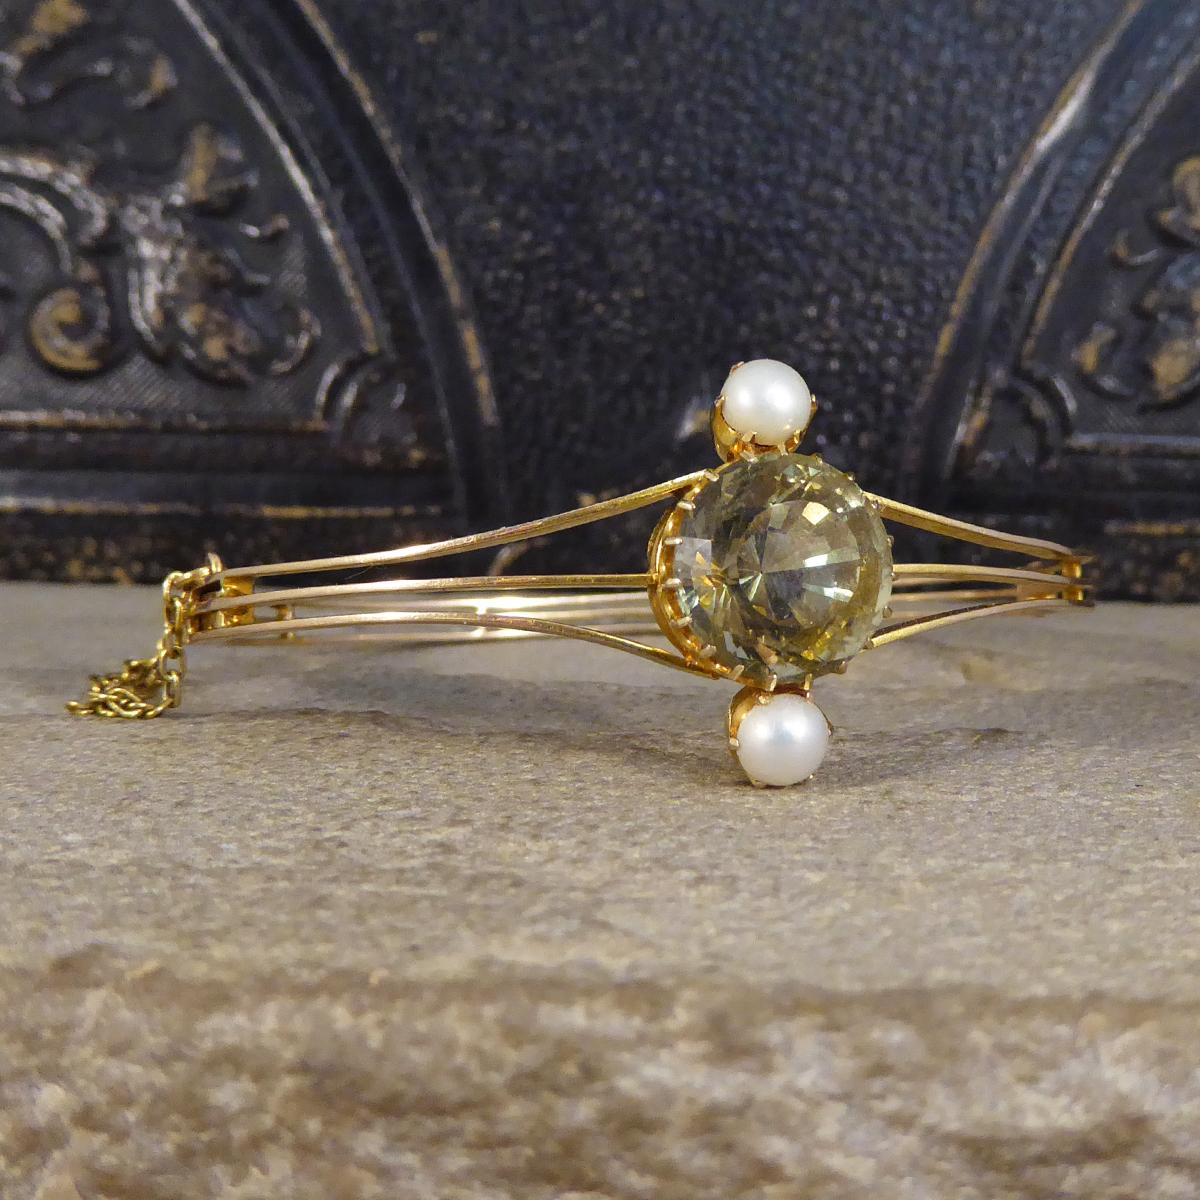 Such a Lovely antique bangle hand crafted in the Edwardian era from 15ct Yellow Gold. It holds an unique Aquamarine in the centre with a greenish colour in a claw setting weighing 6.52ct with a Pearl set above and below. The bangle itself is made